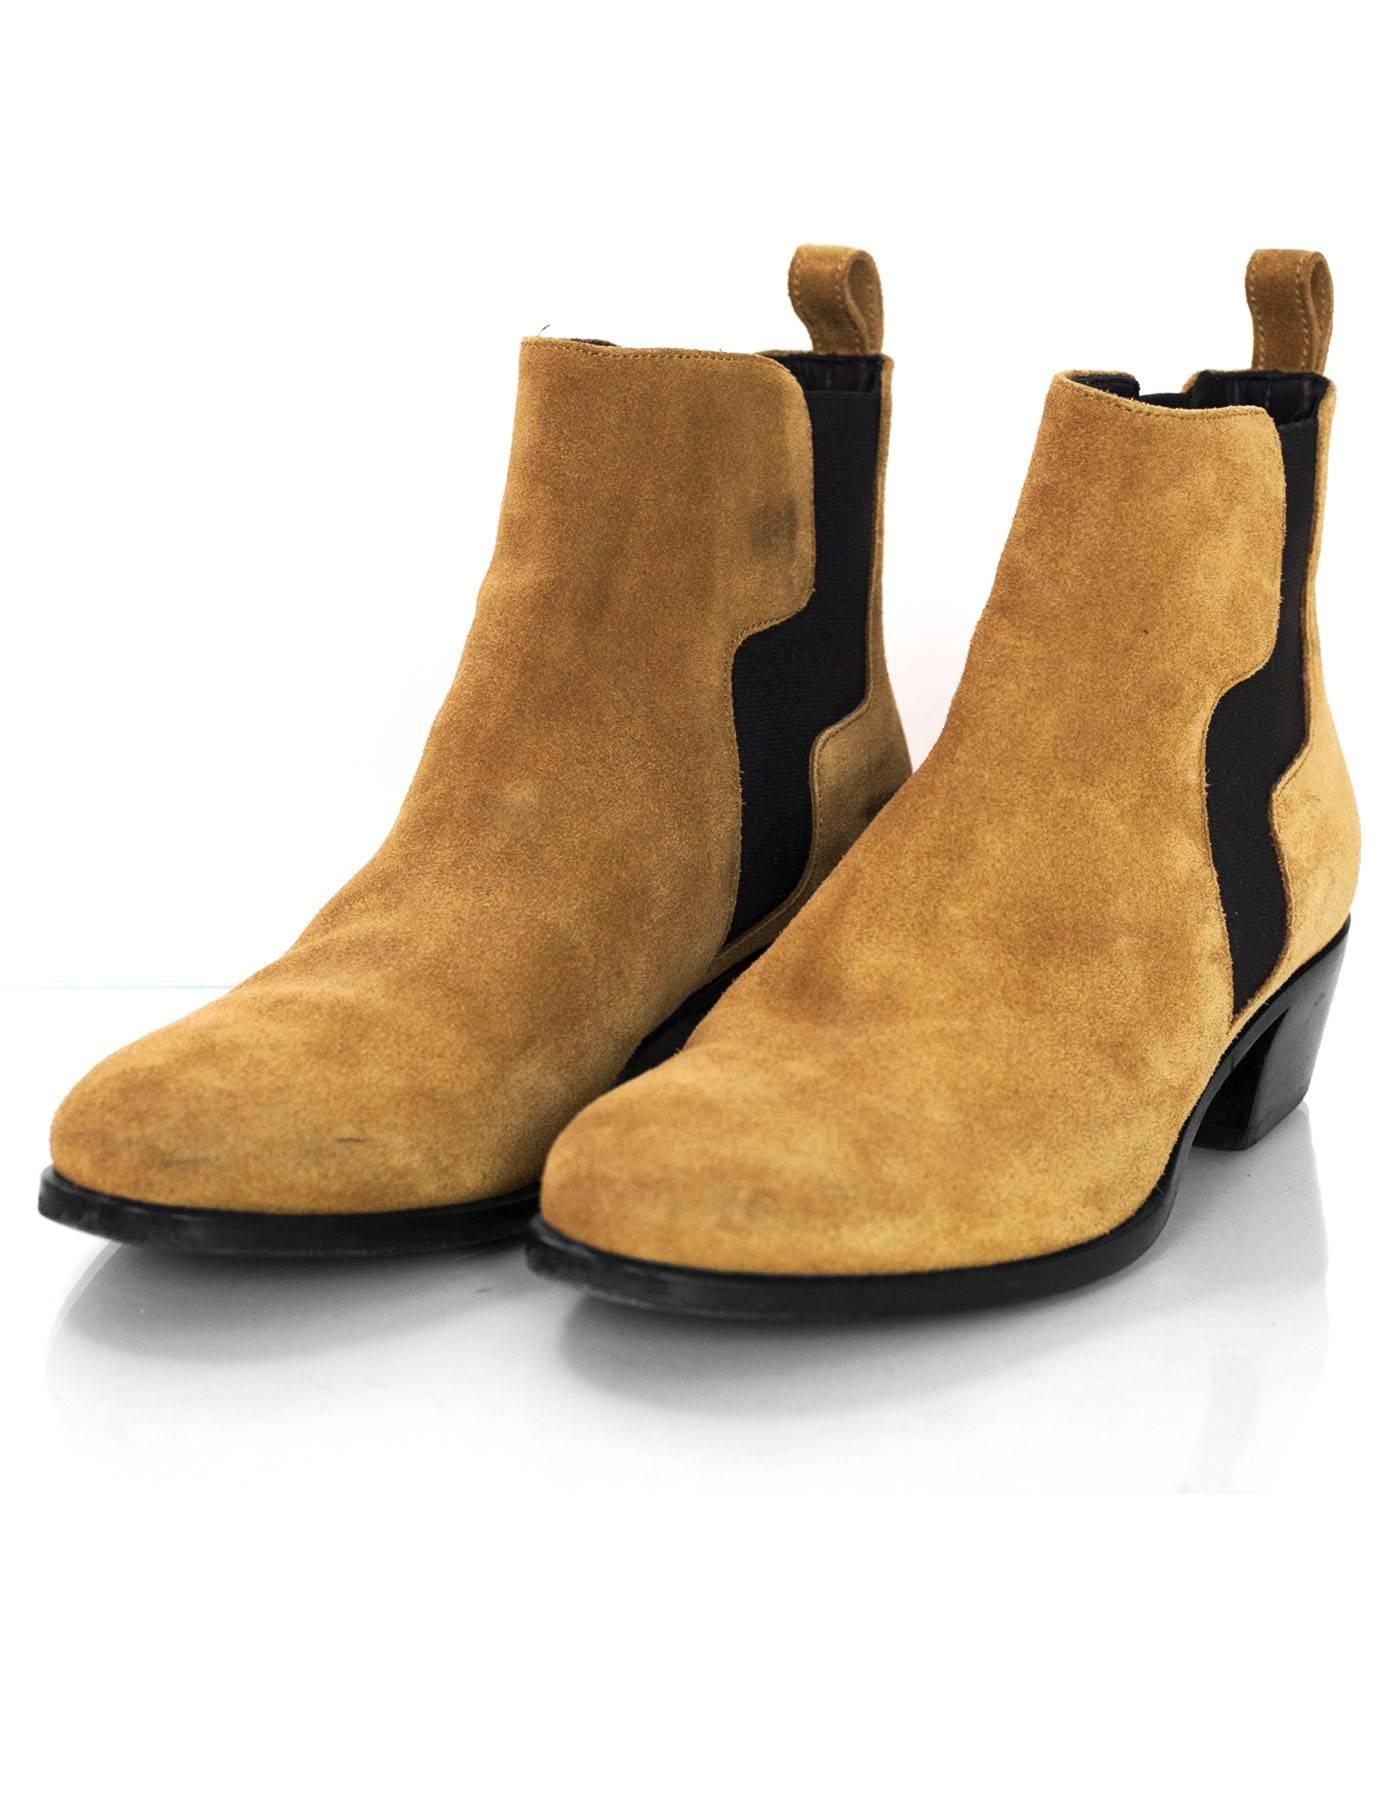 Pierre Hardy Camel Suede Gipsy Ankle Boots Sz 36

Made In: Italy
Color: Camel
Materials: Suede
Closure/Opening: Pull on, stretch sides
Sole Stamp: Pierre Hardy Made in Italy 36
Retail Price: $845 + tax
Overall Condition: Excellent pre-owned